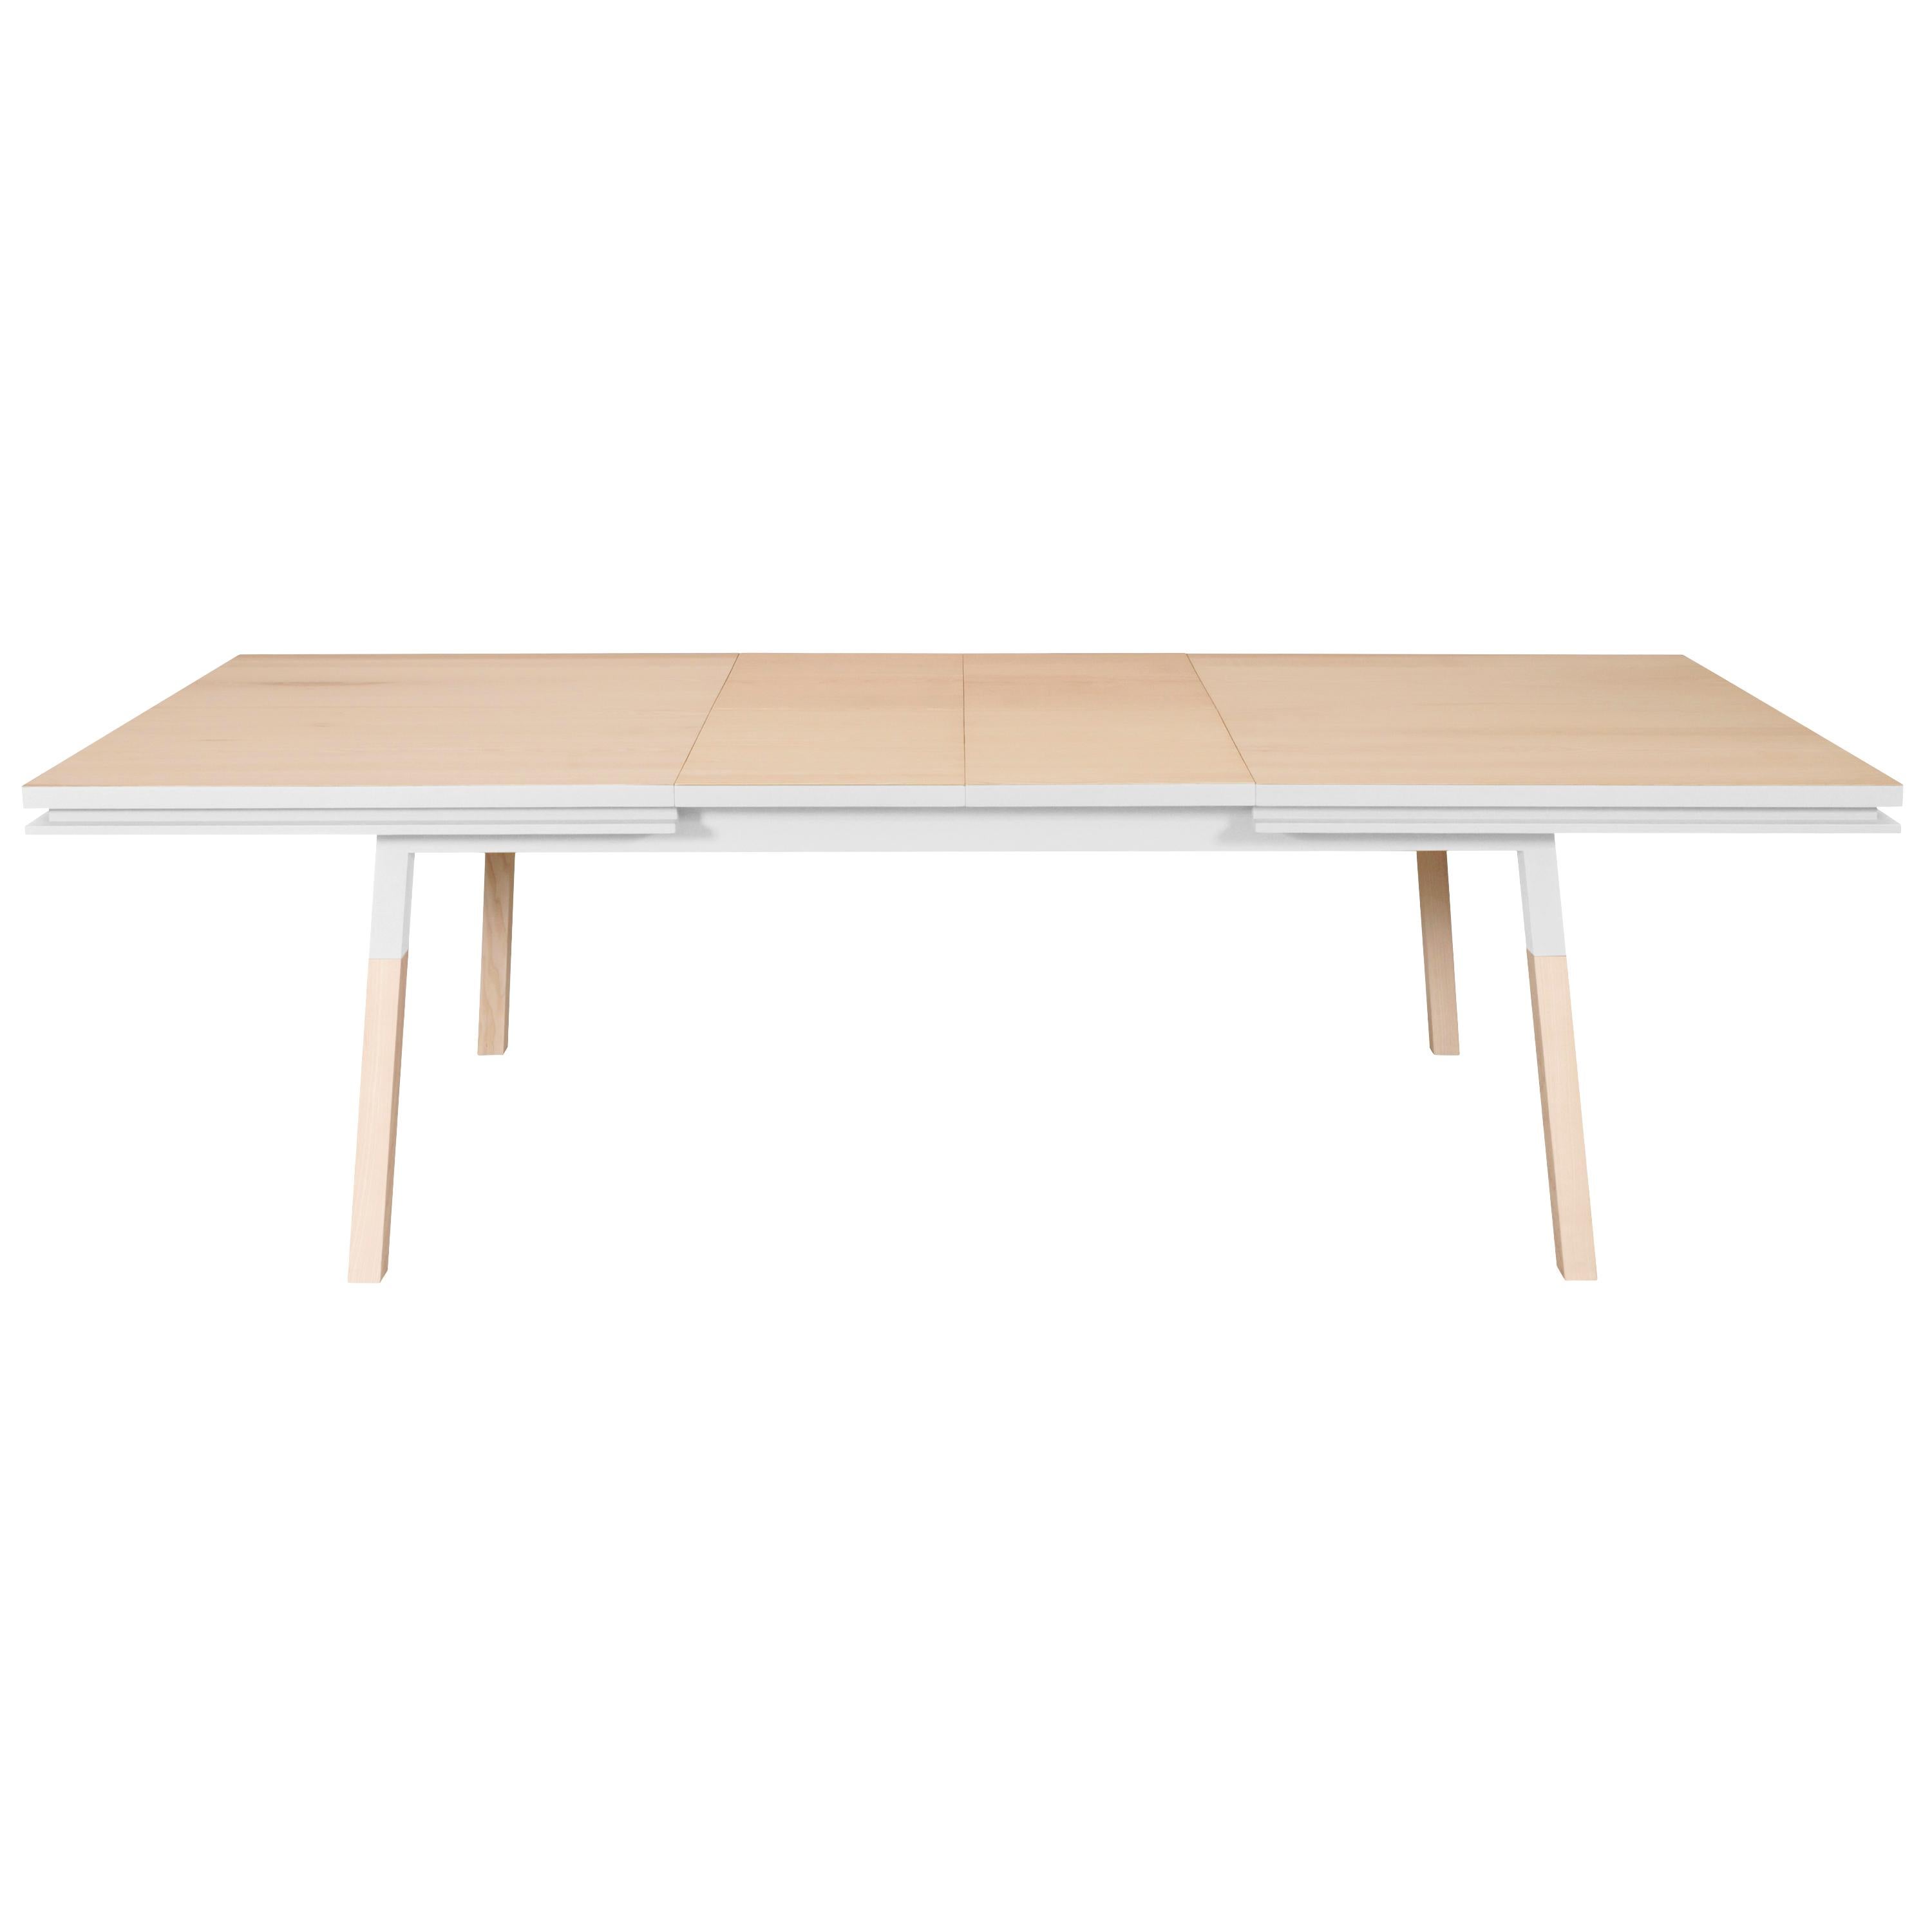 Extensible Table in Natural Solid Wood & White Finish, Design Eric Gizard, Paris For Sale 1